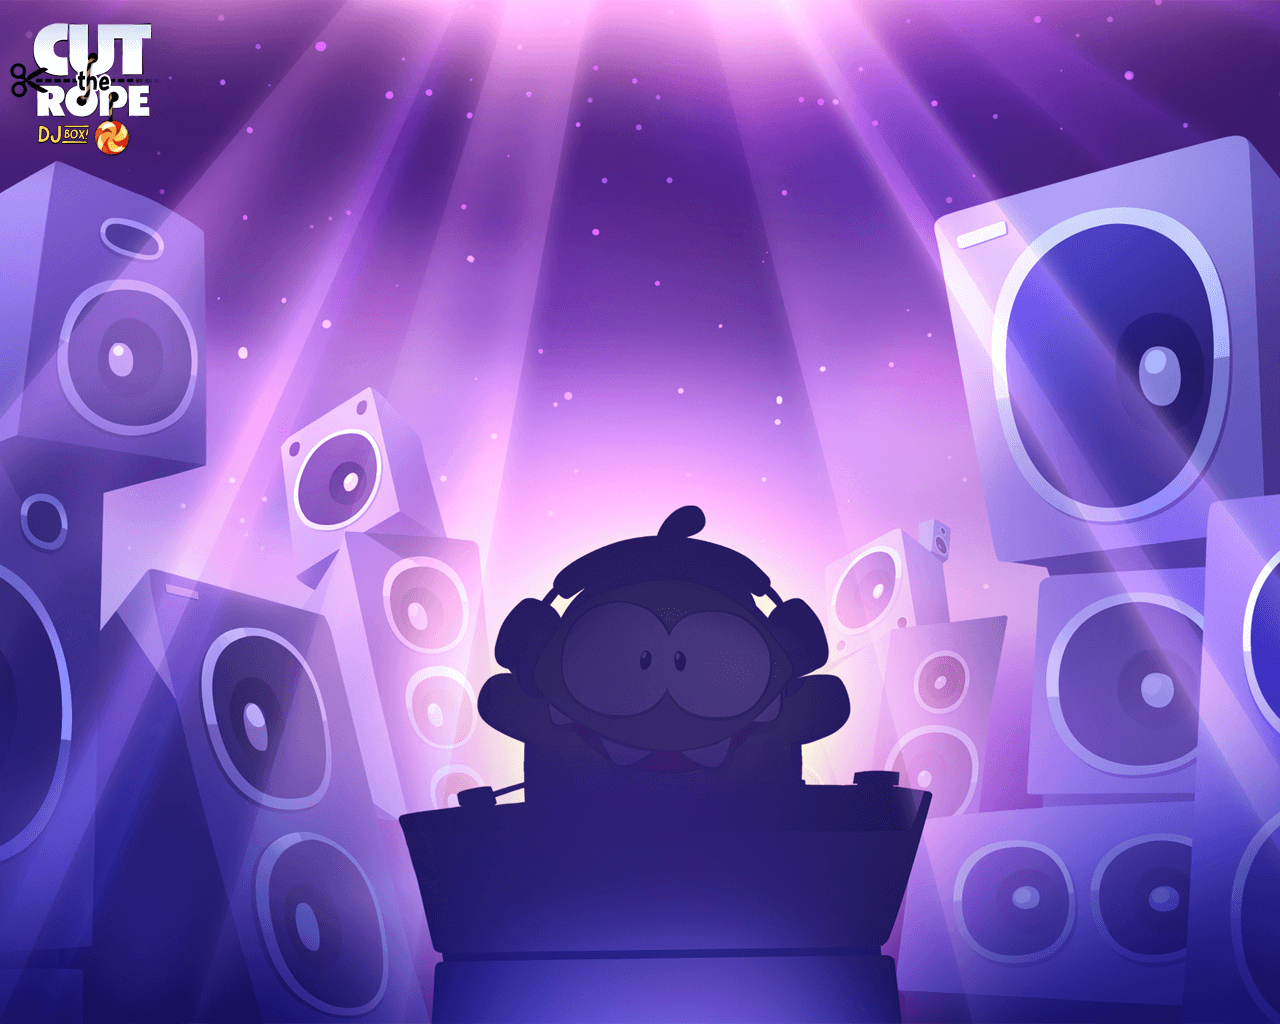 Cut the Rope DJ Box. Official Cut the Rope Artwork